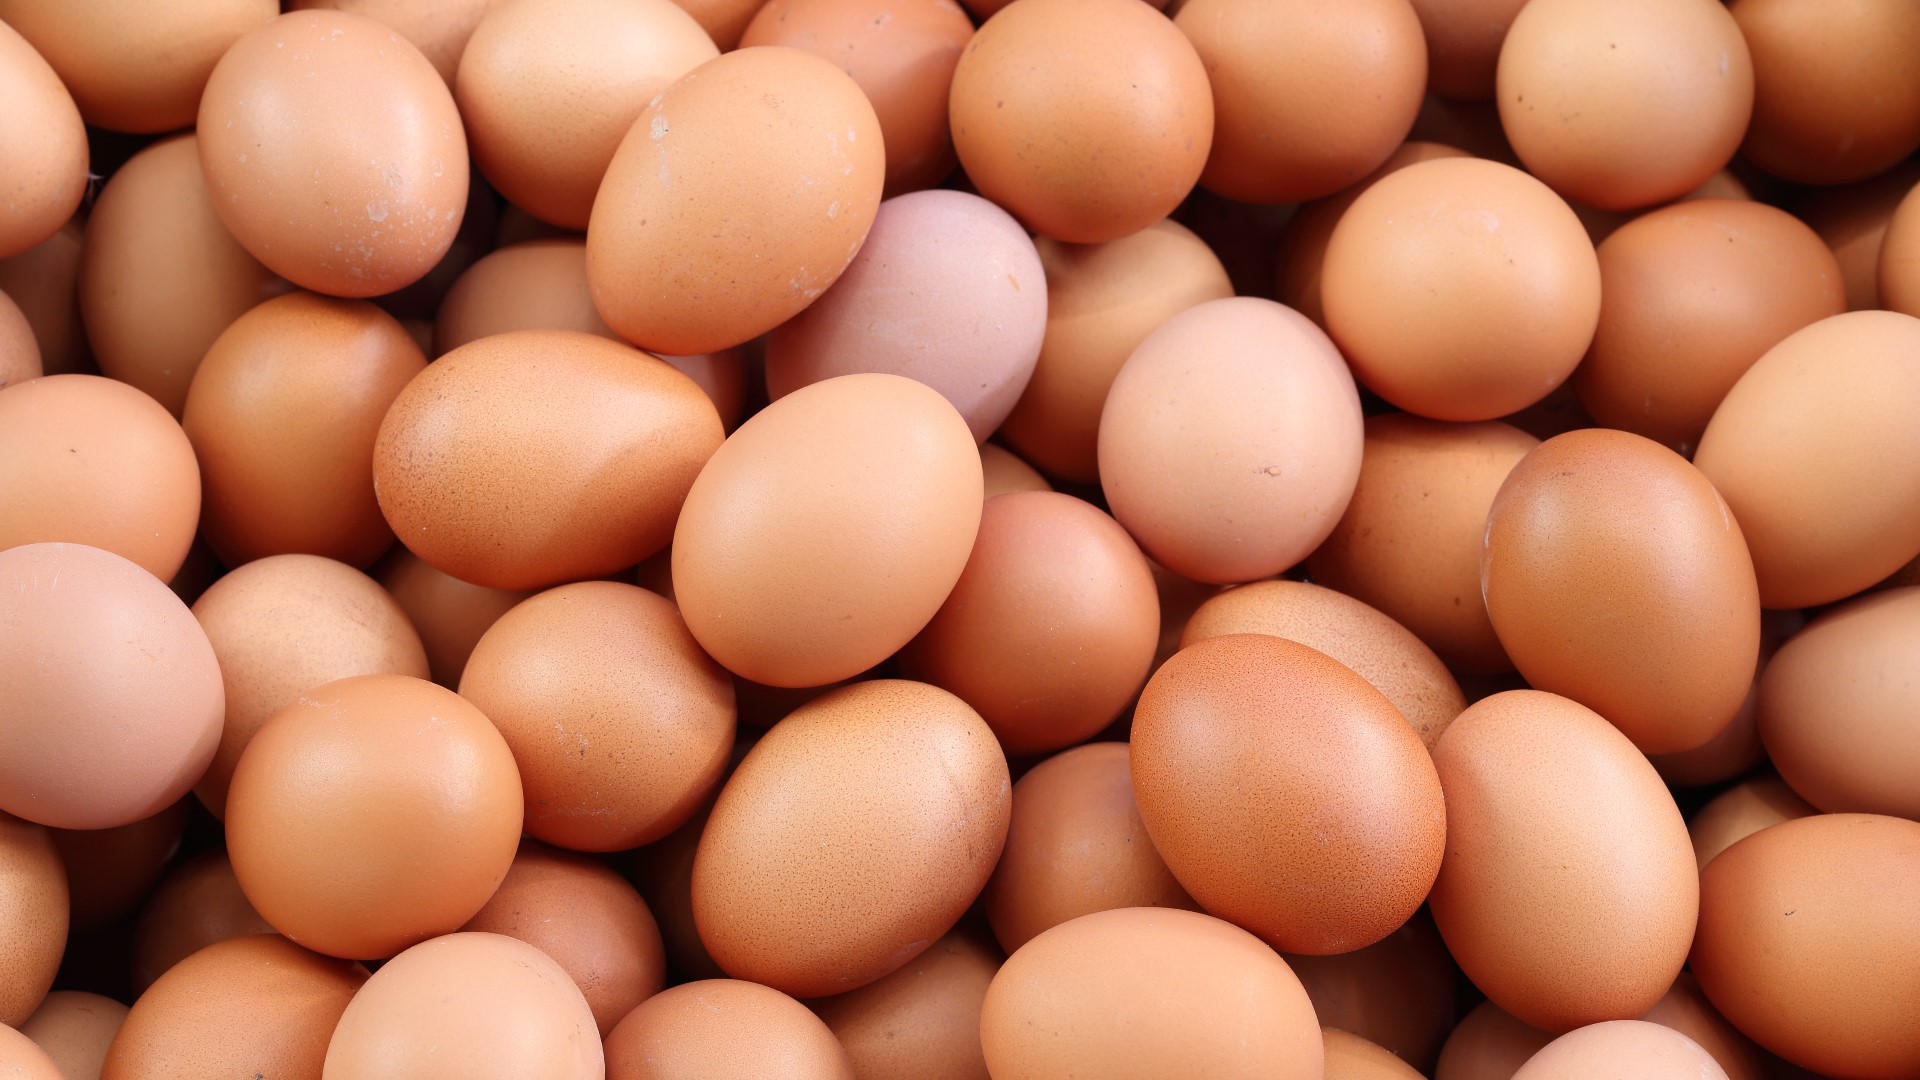 Egg prices increased almost 6% from January to February alone.